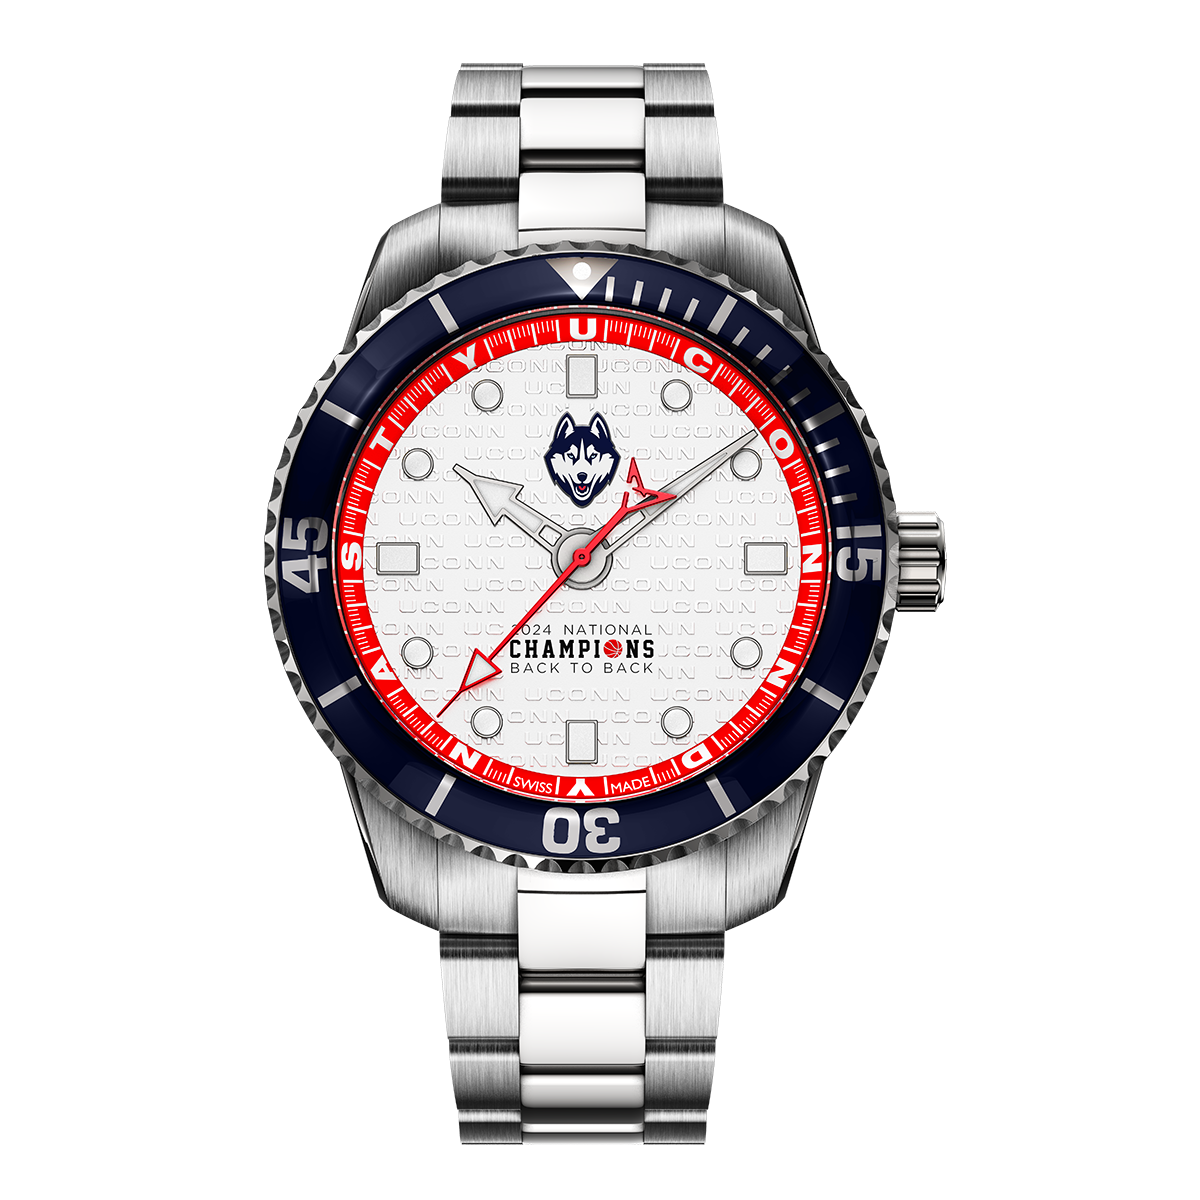 UCONN 2024 National Champions Swiss made automatic watch. Back to back champions. Front view.